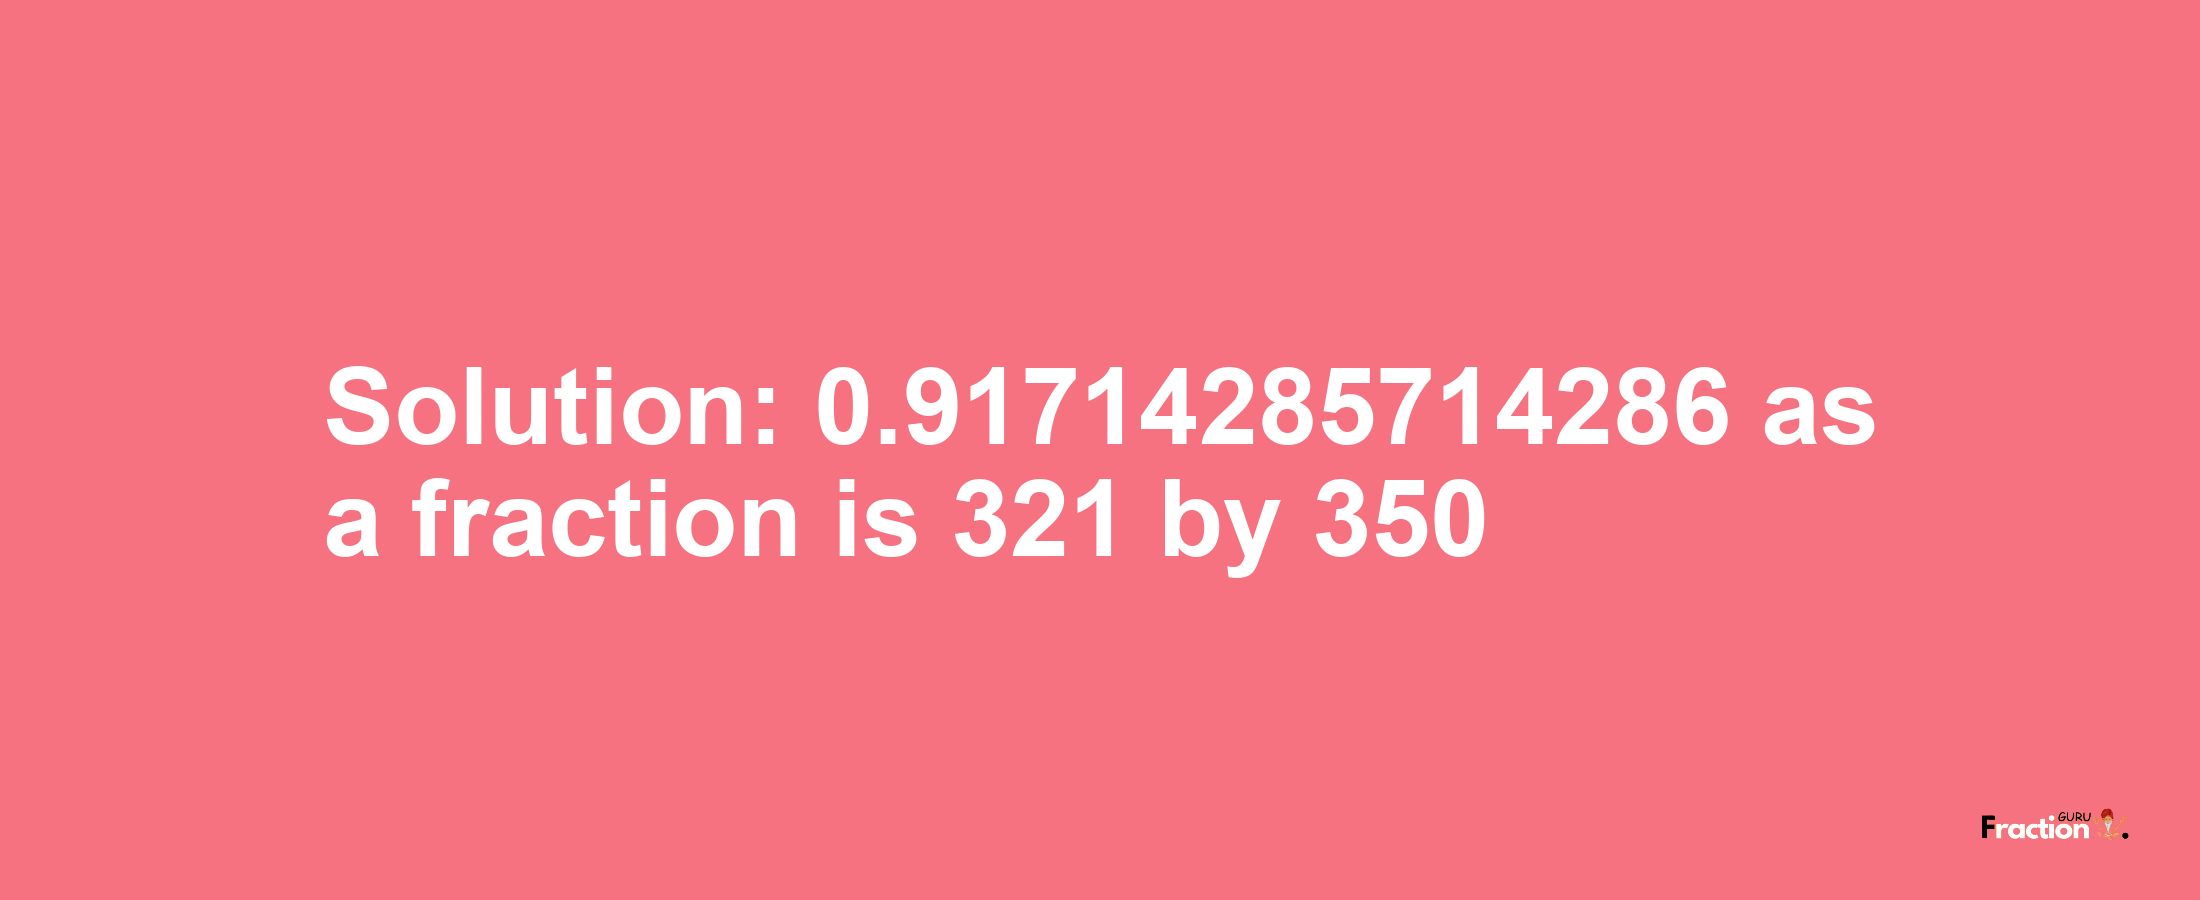 Solution:0.91714285714286 as a fraction is 321/350